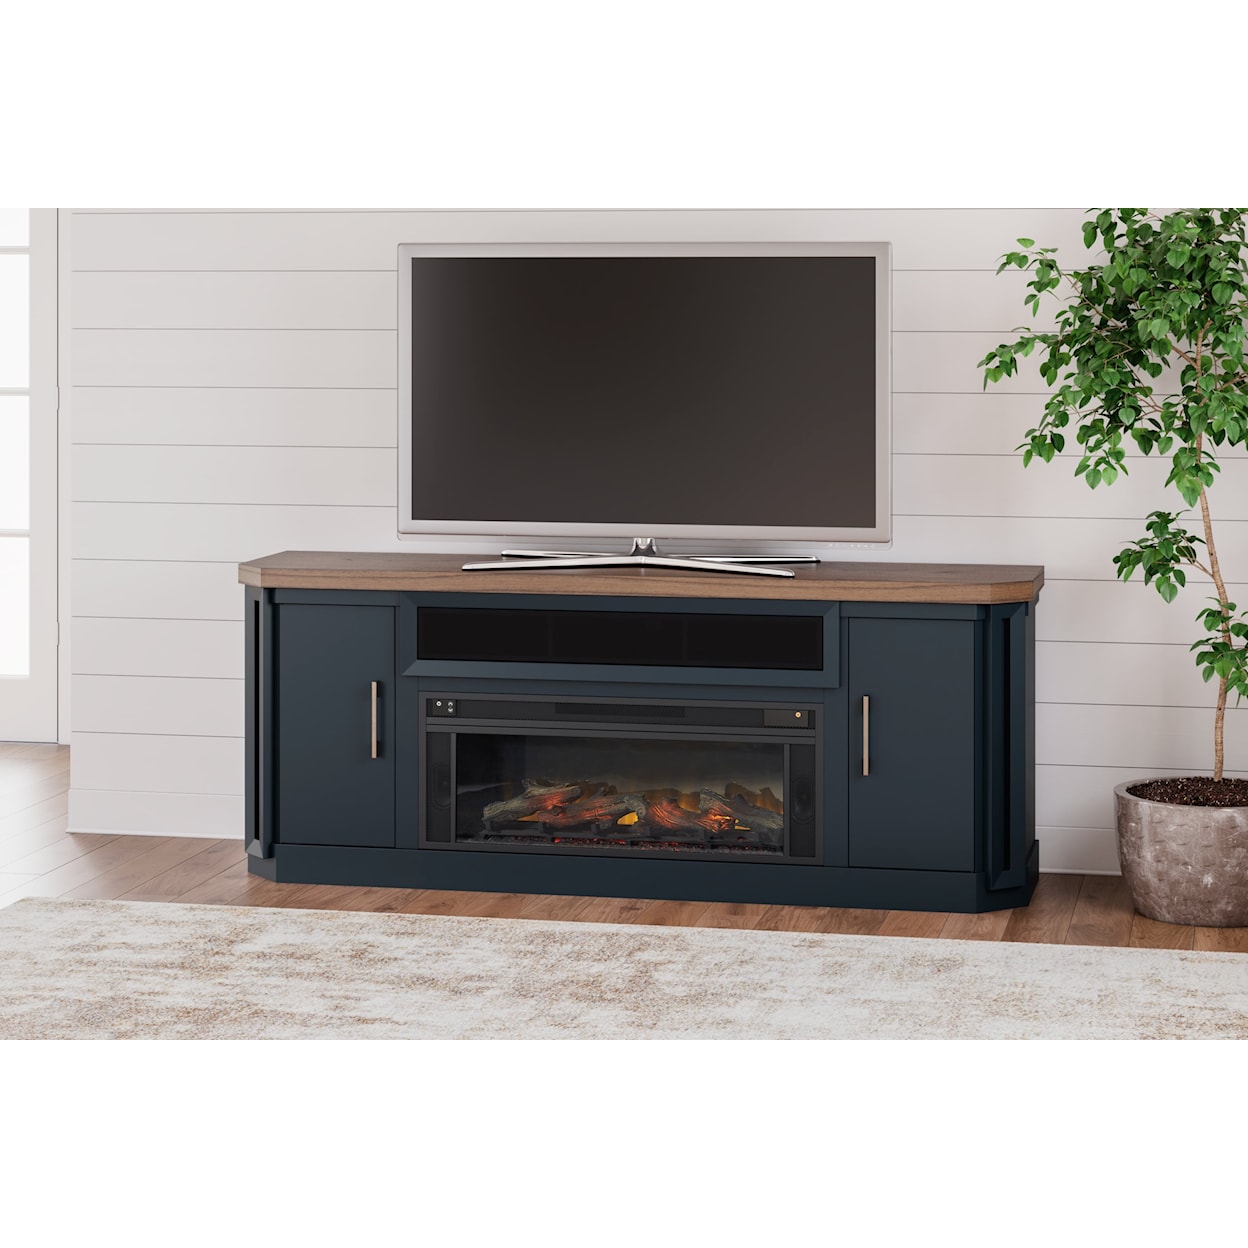 Michael Alan Select Landocken 83" TV Stand with Electric Fireplace